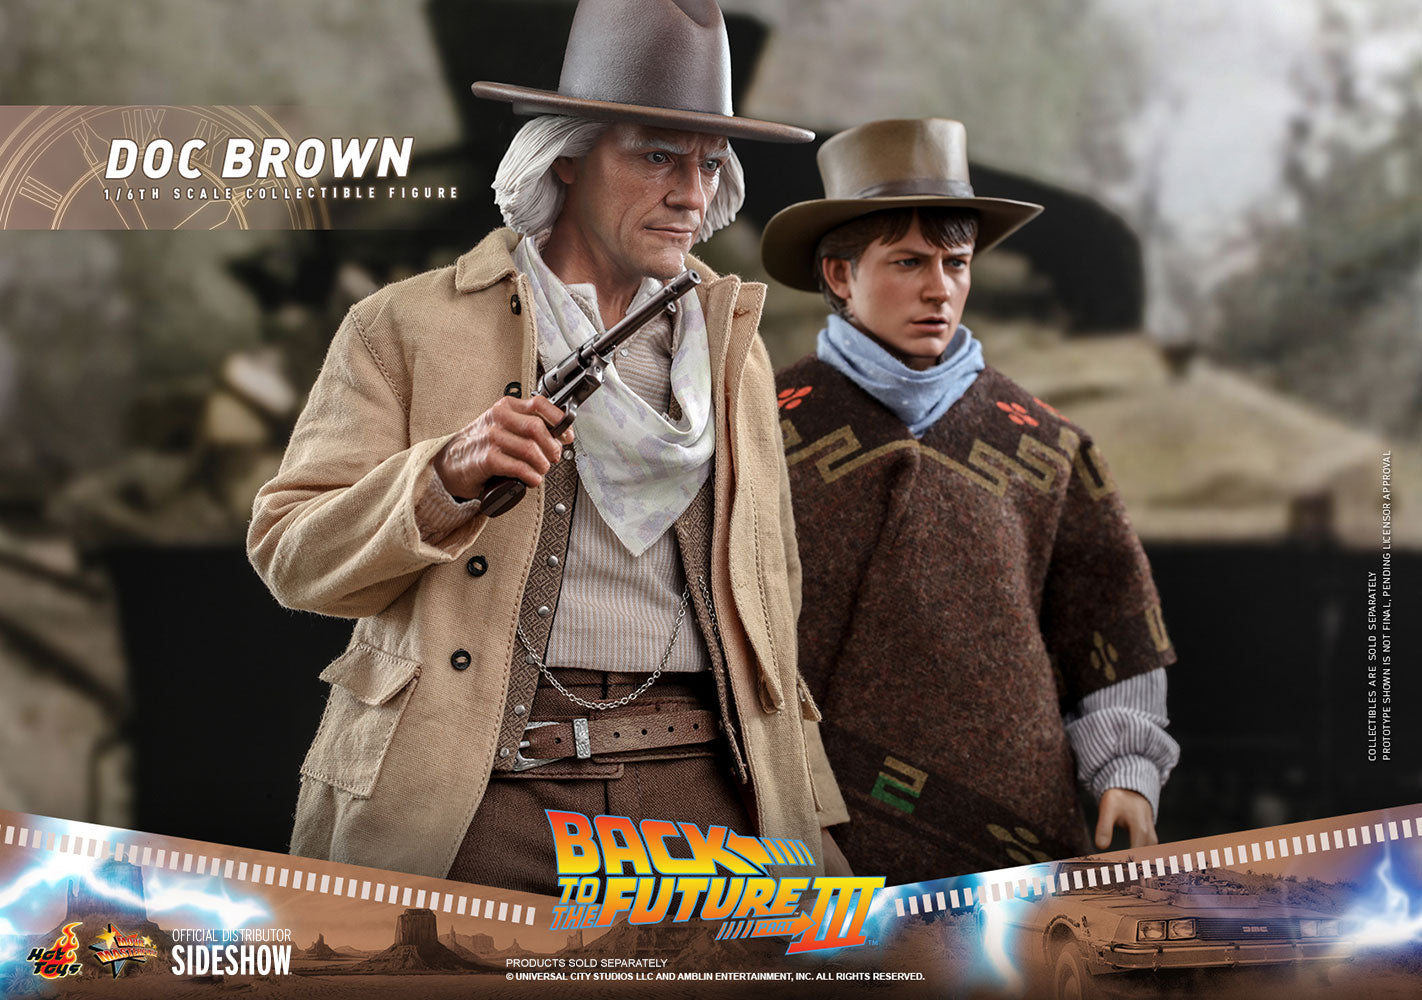  Back to the Future 3: Doc Brown 1:6 Scale Figure  4895228609359